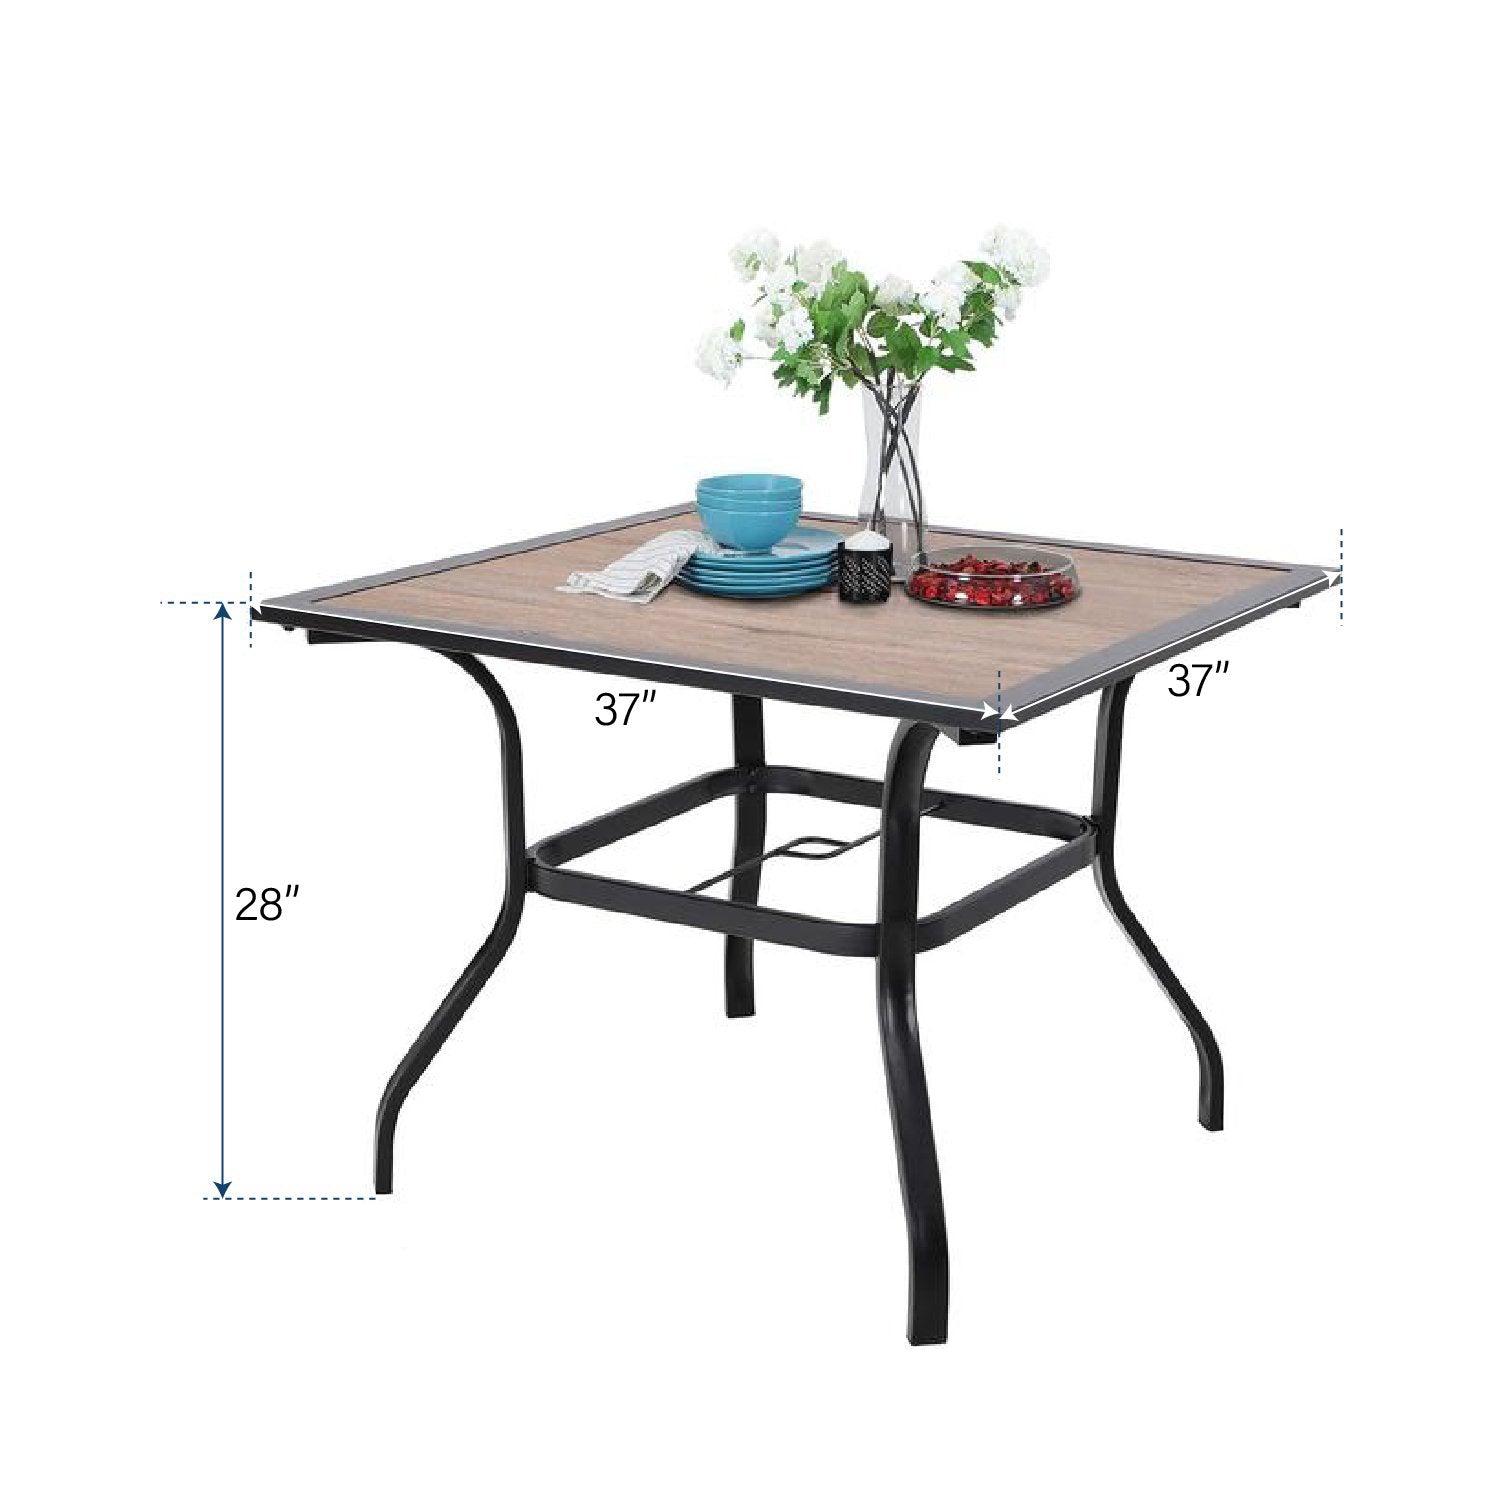 MFSTUDIO 5-Piece Wood-look Square Table & Simple Aluminum Textilene Fixed Chairs Patio Dining Set